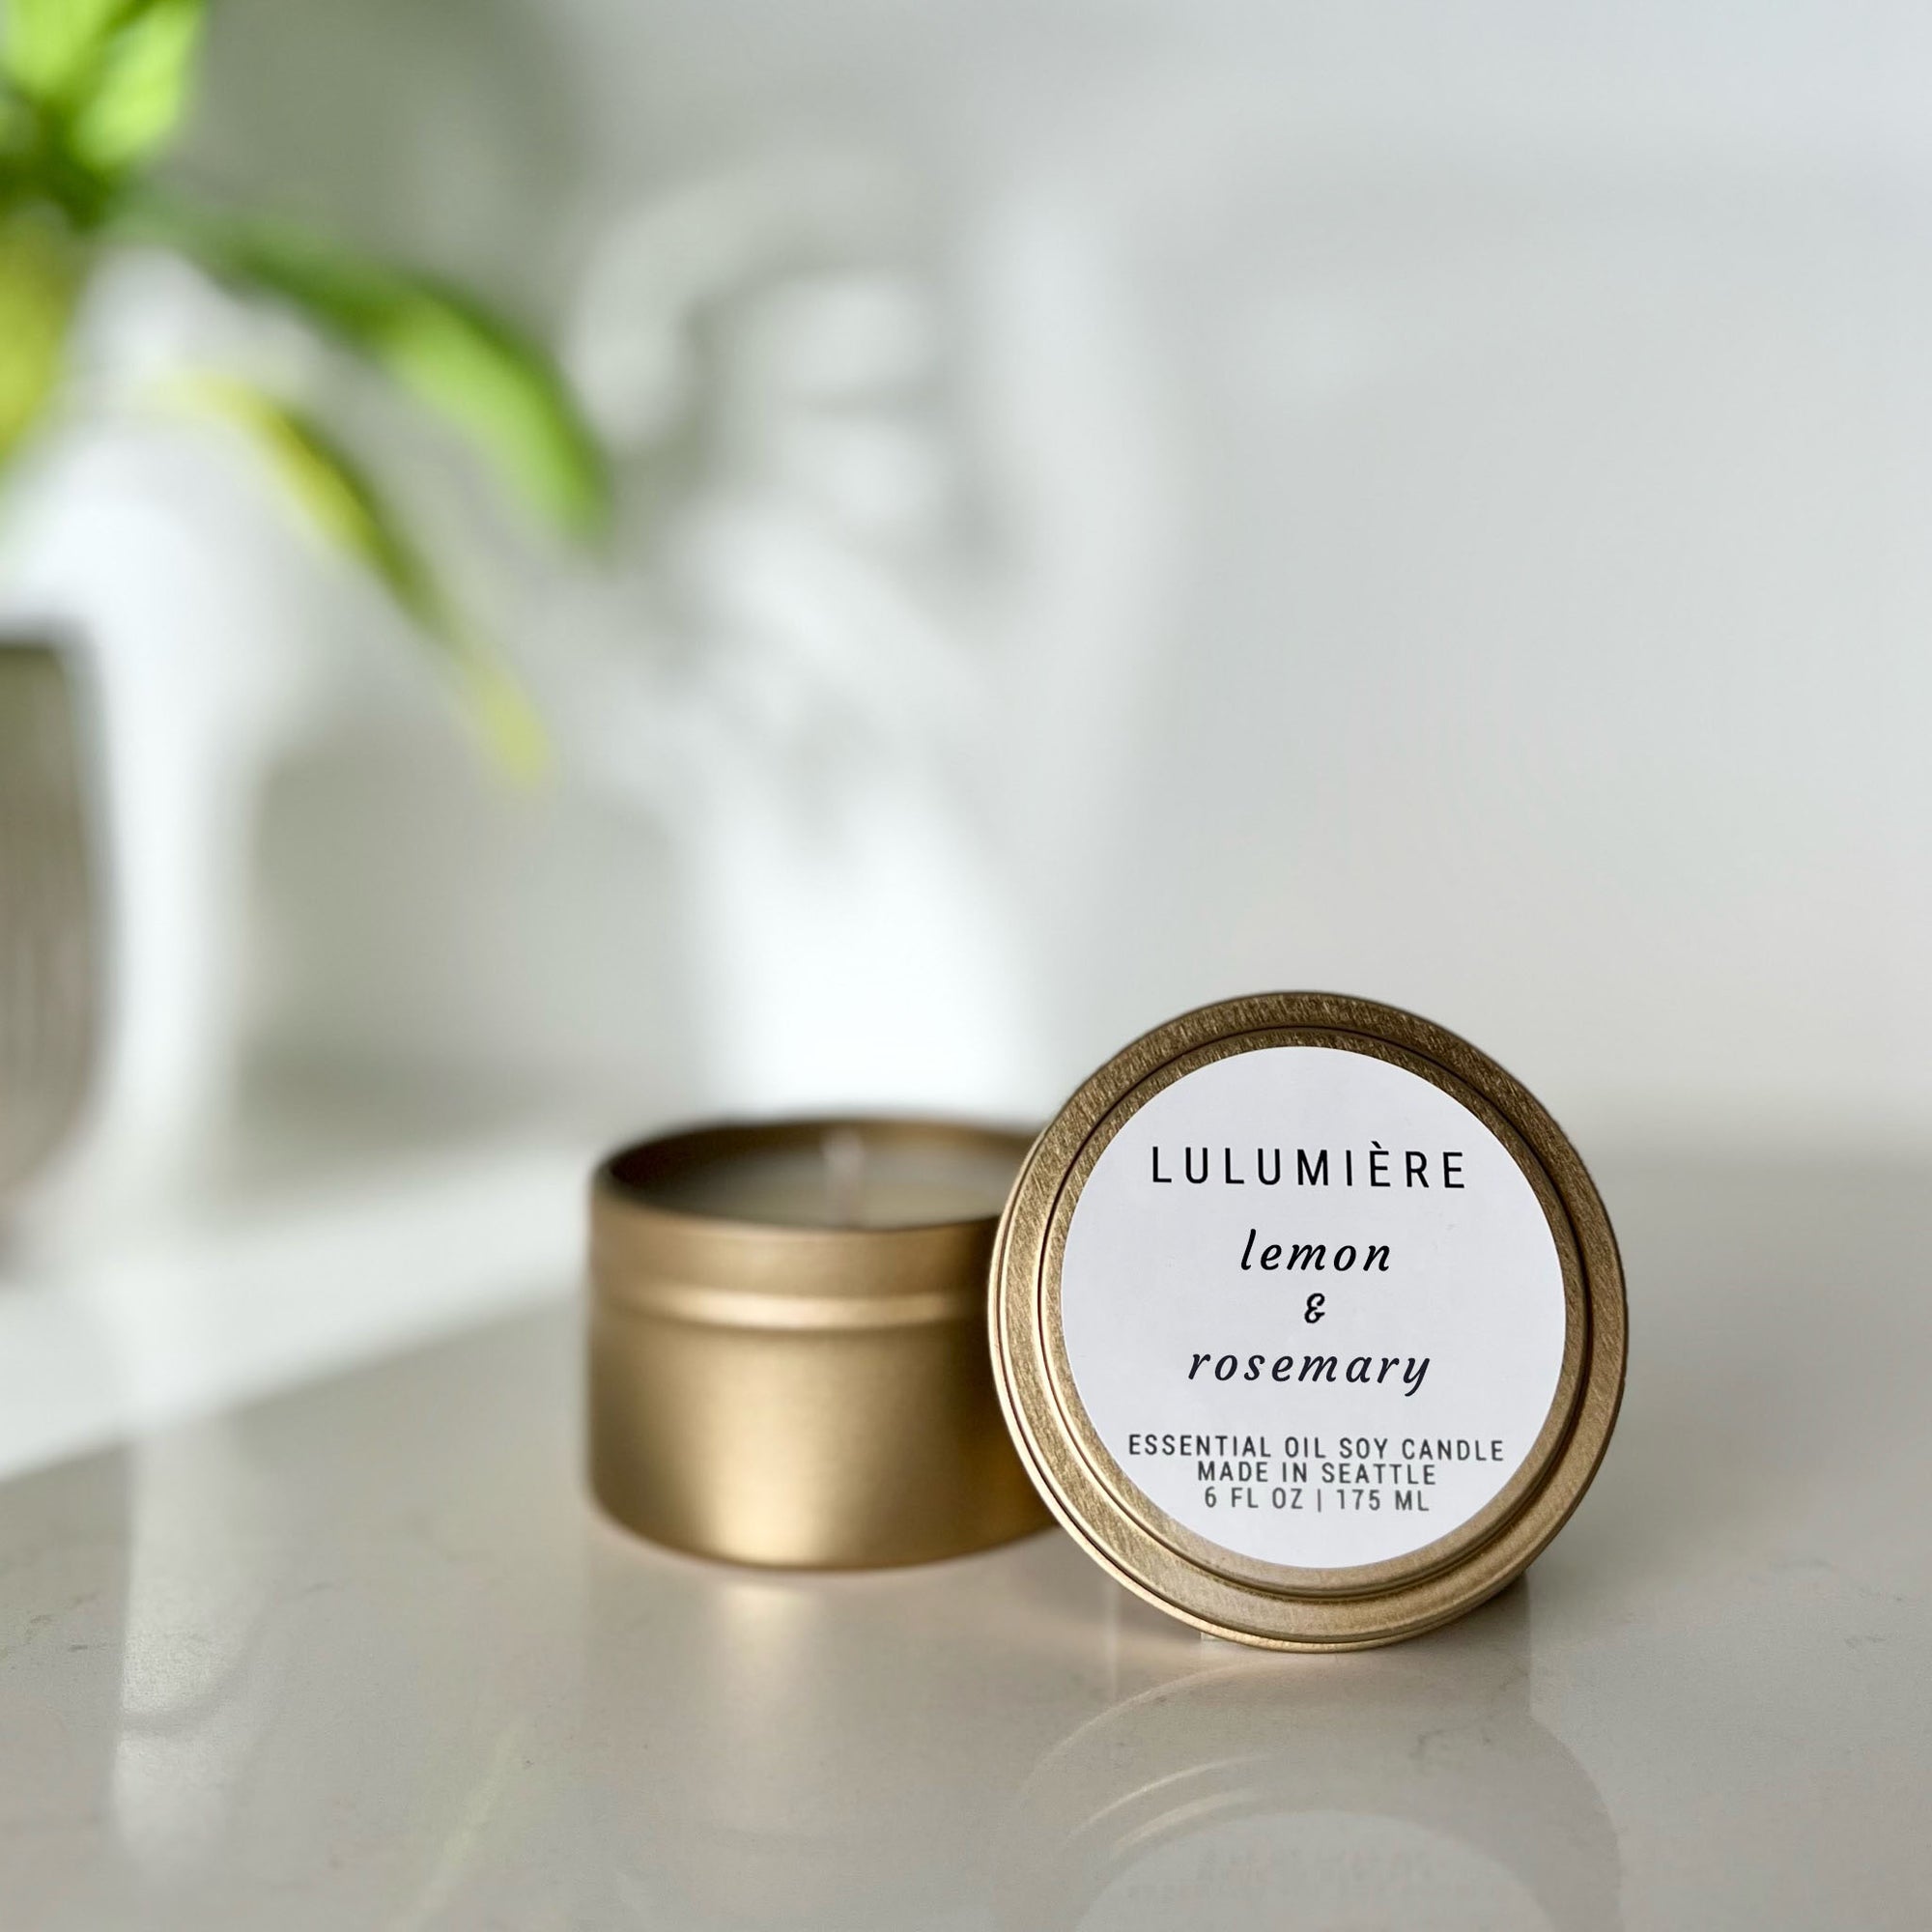 LULUMIÈRE Lemon & Rosemary Essential Oil Candle